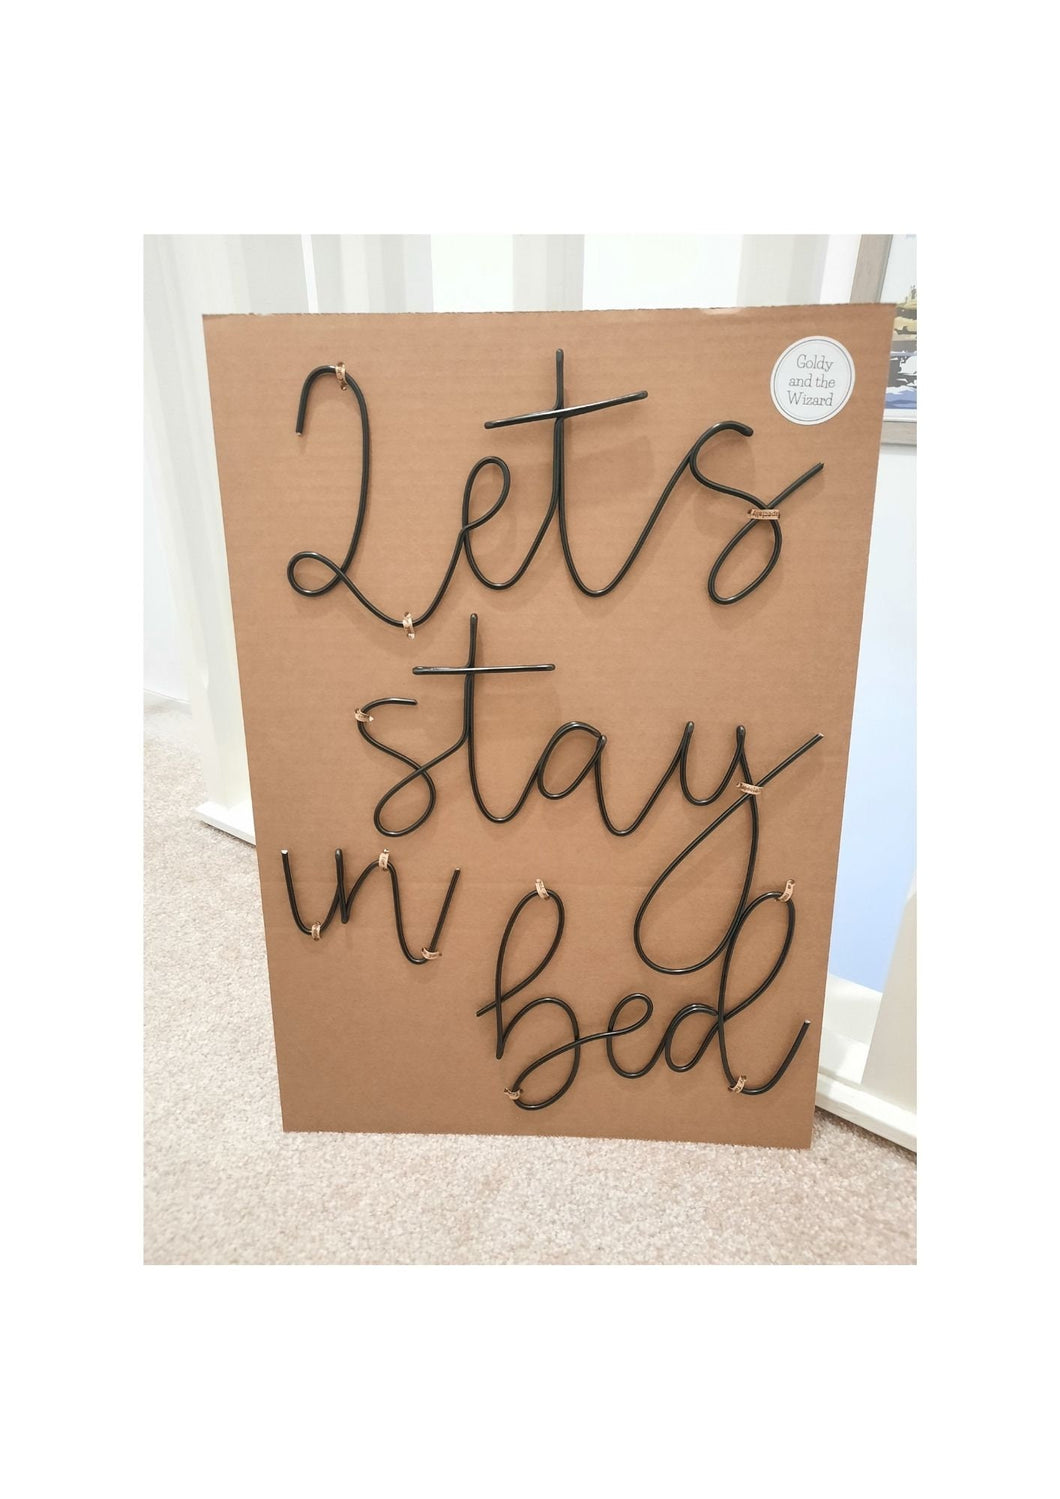 Wire Let's stay in bed wall sign